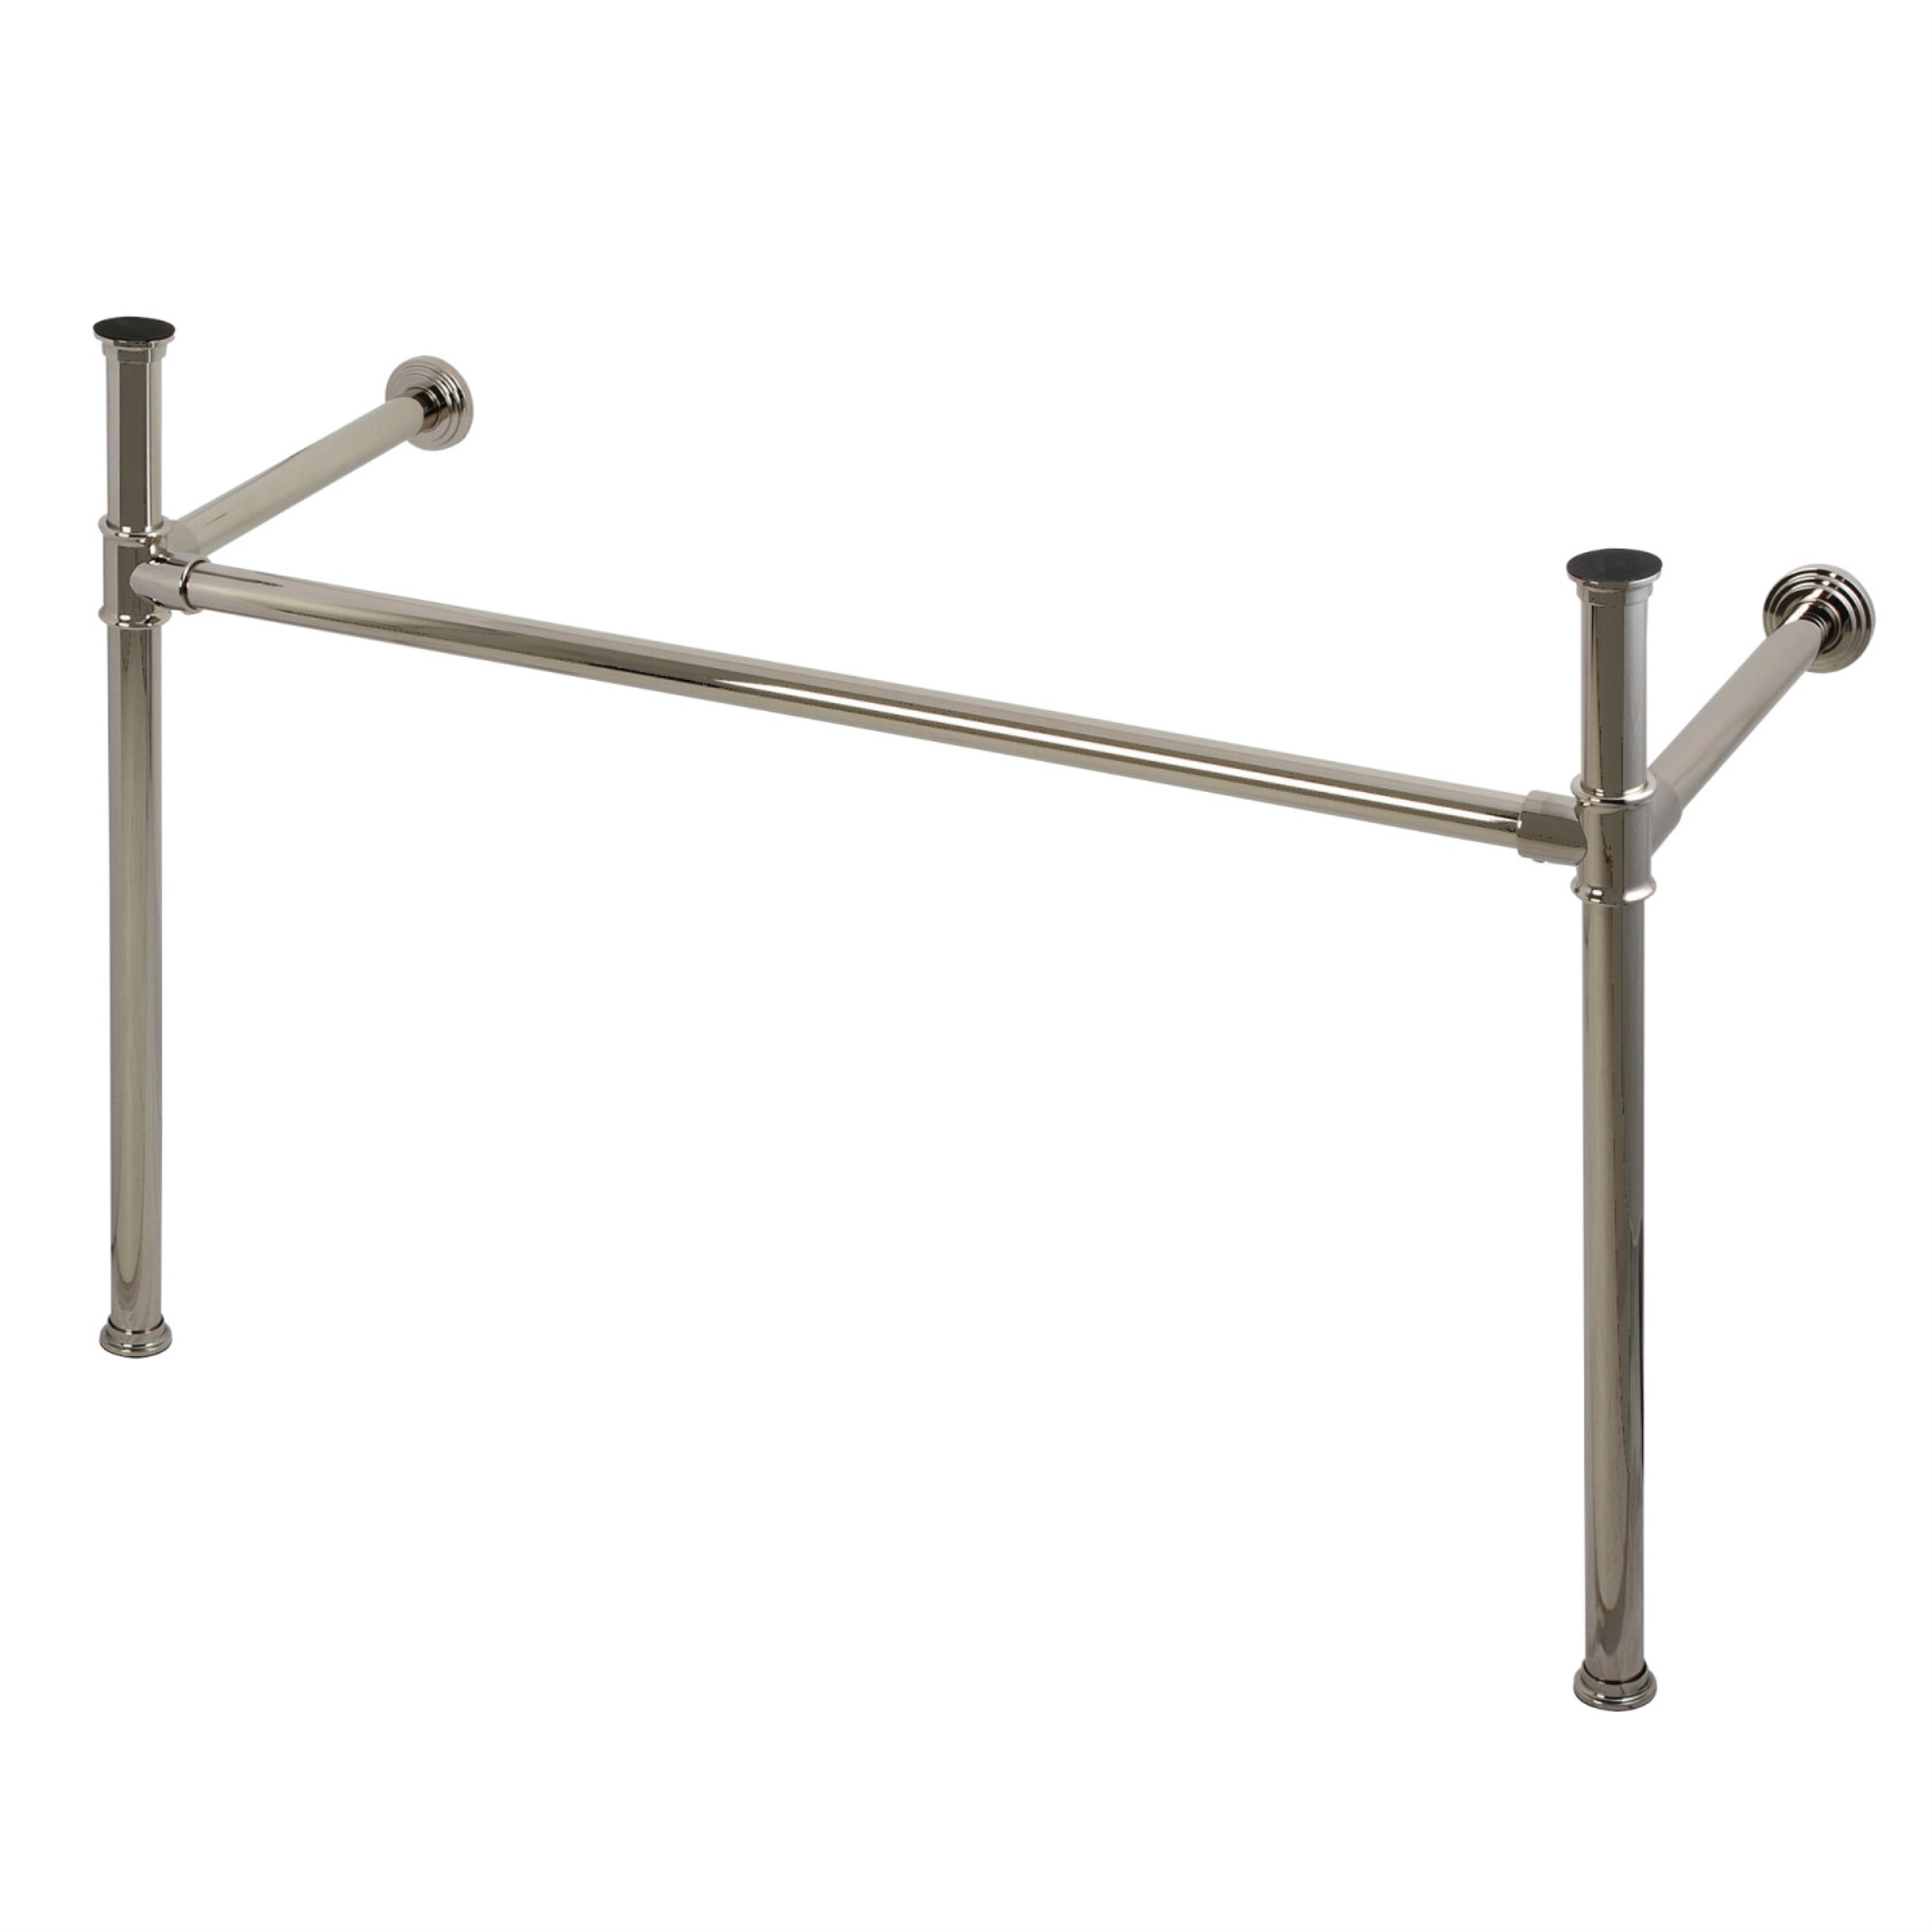 Fauceture VPB14886 Imperial Stainless Steel Console Legs for VPB1488B, Polished Nickel